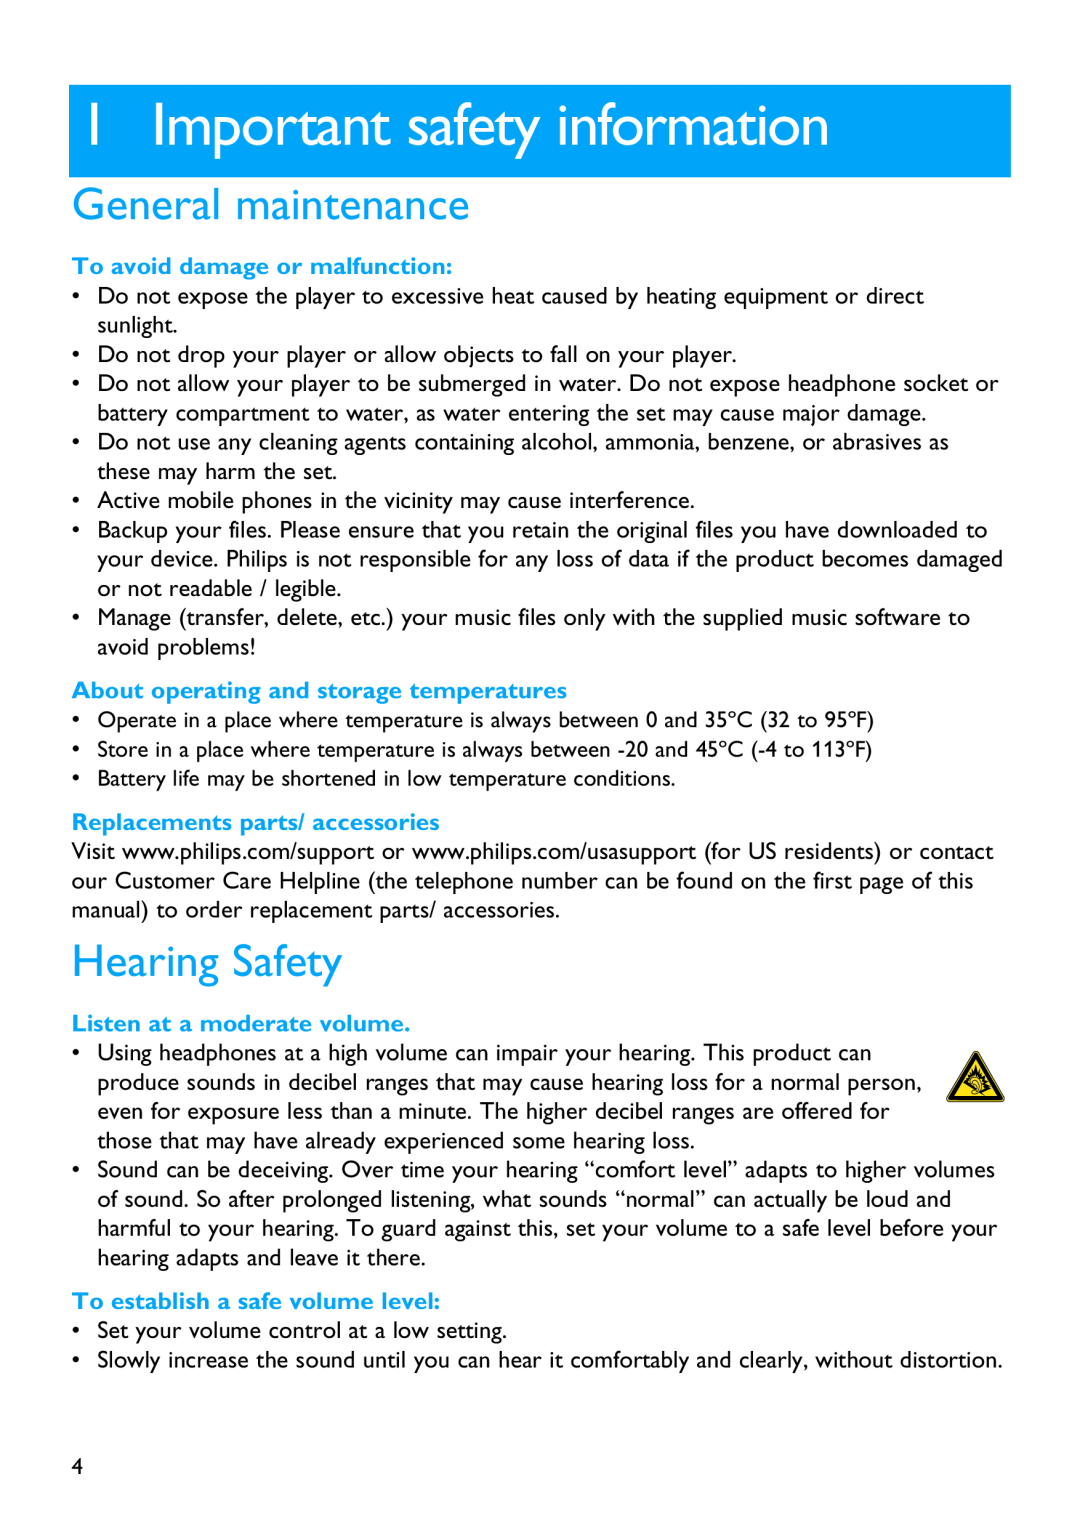 Philips SA2121, SA2104 Important safety information, General maintenance, Hearing Safety, To avoid damage or malfunction 